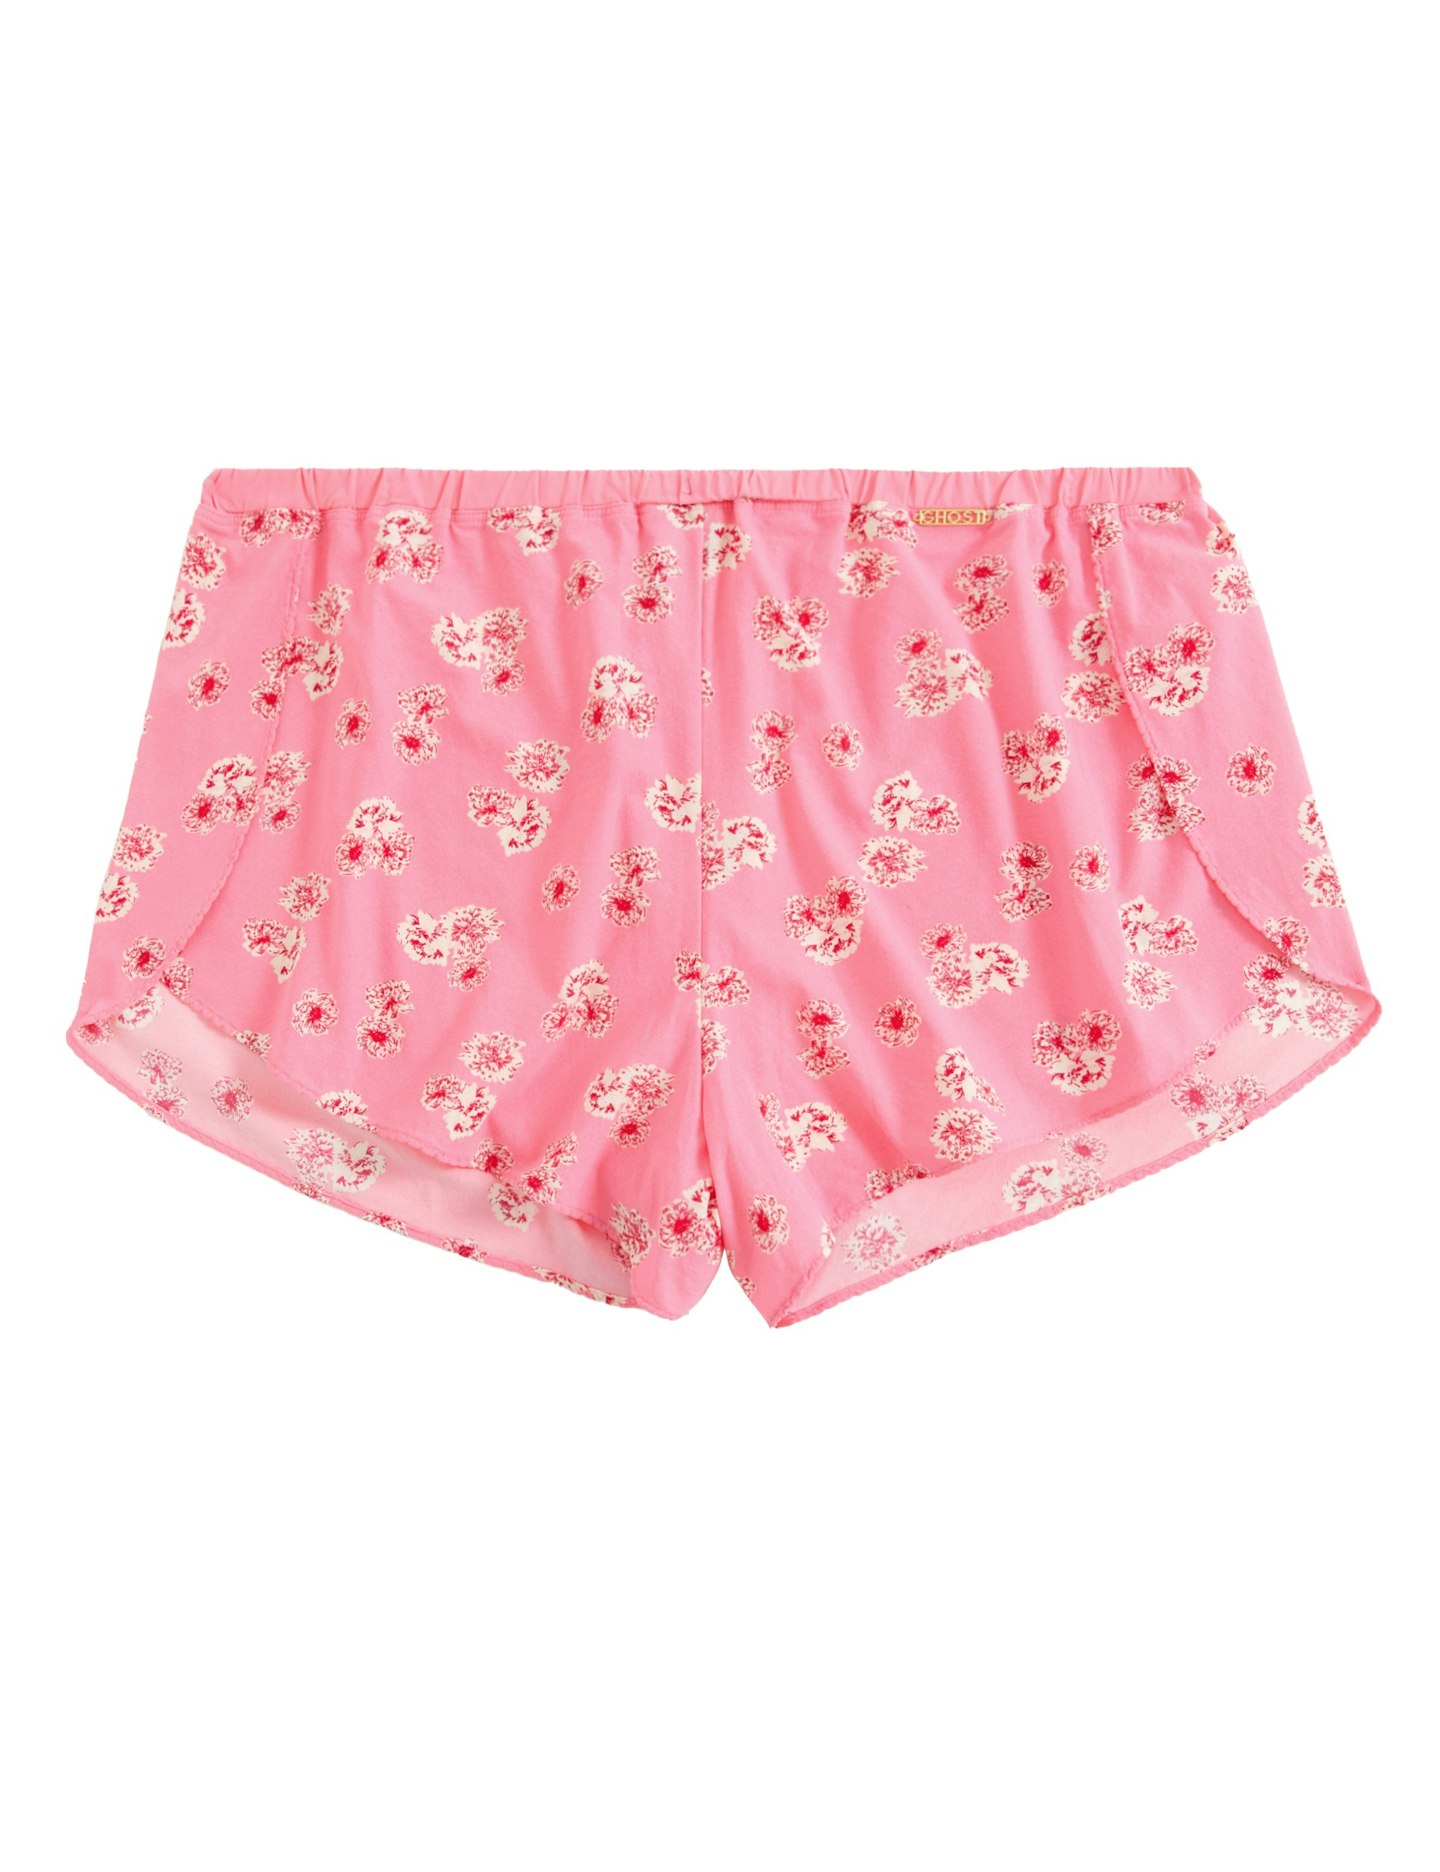 M&S X Ghost French Knicker £18